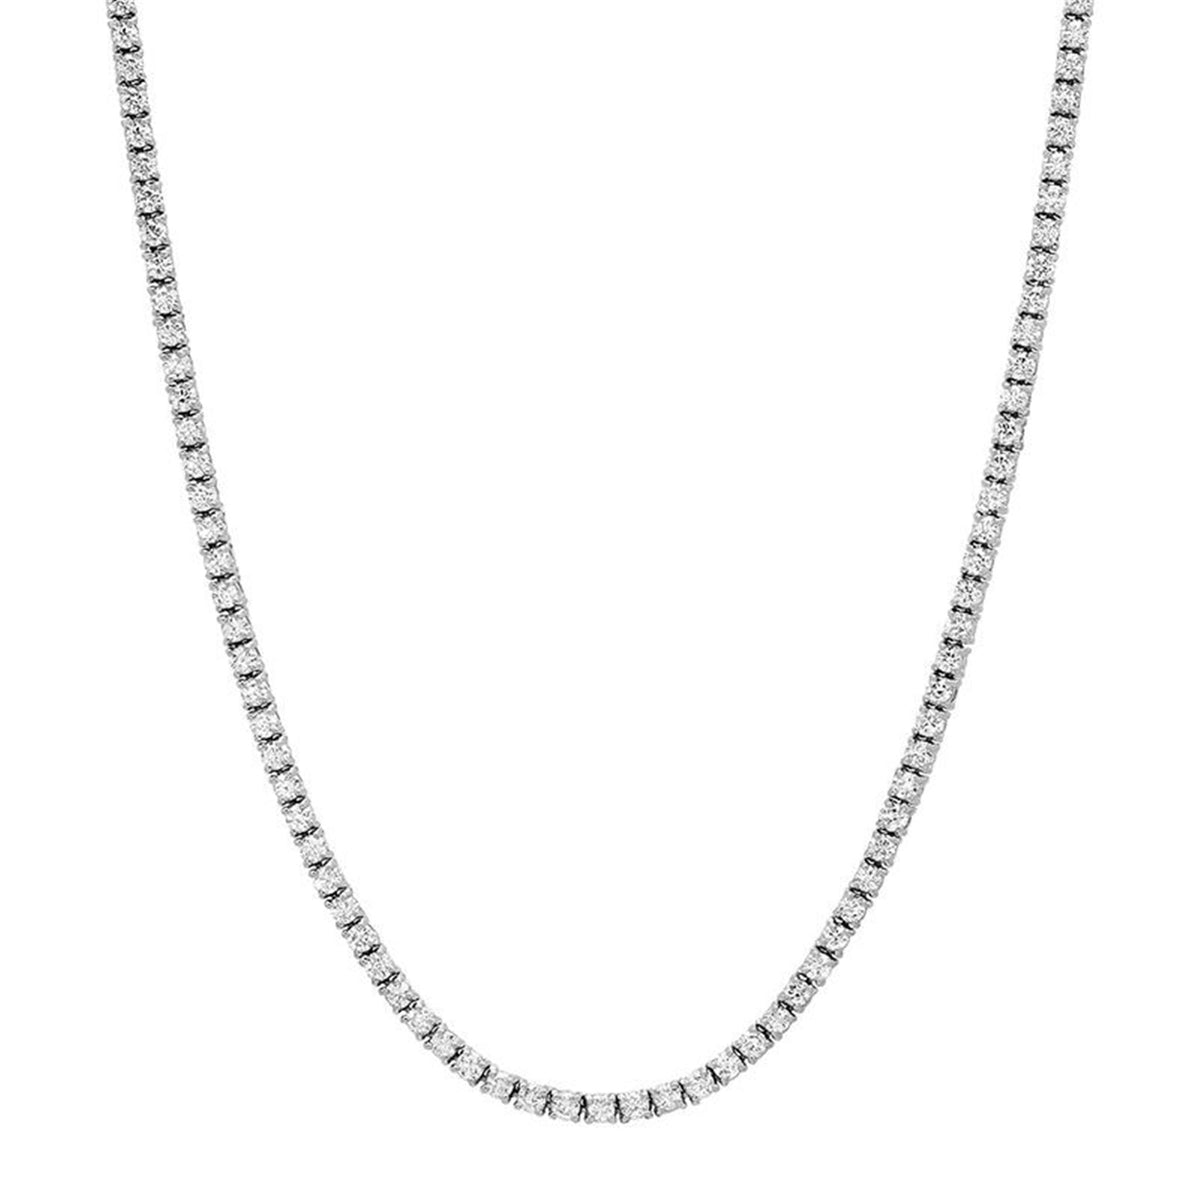 14Kt White Gold Tennis Necklacet With 6.00cttw Natural Diamonds